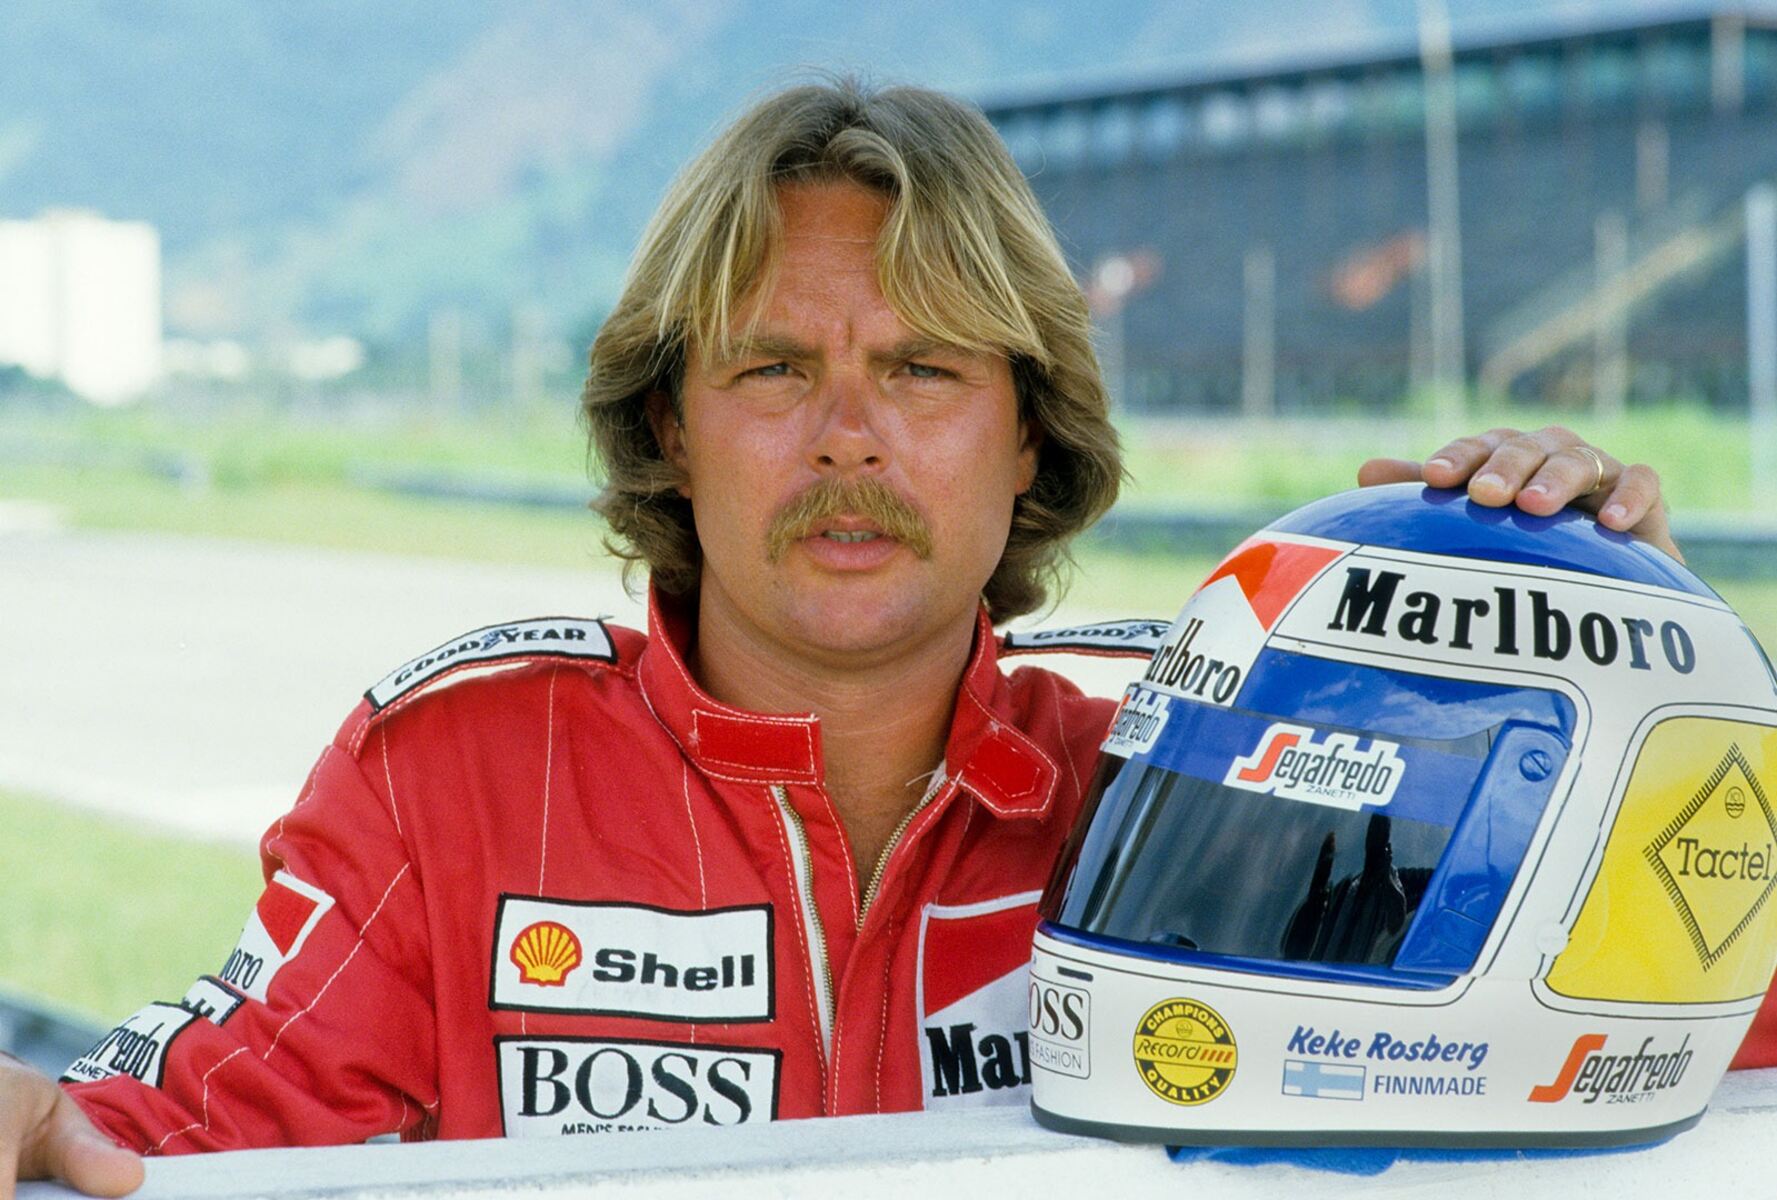 22-mind-blowing-facts-about-keke-rosberg